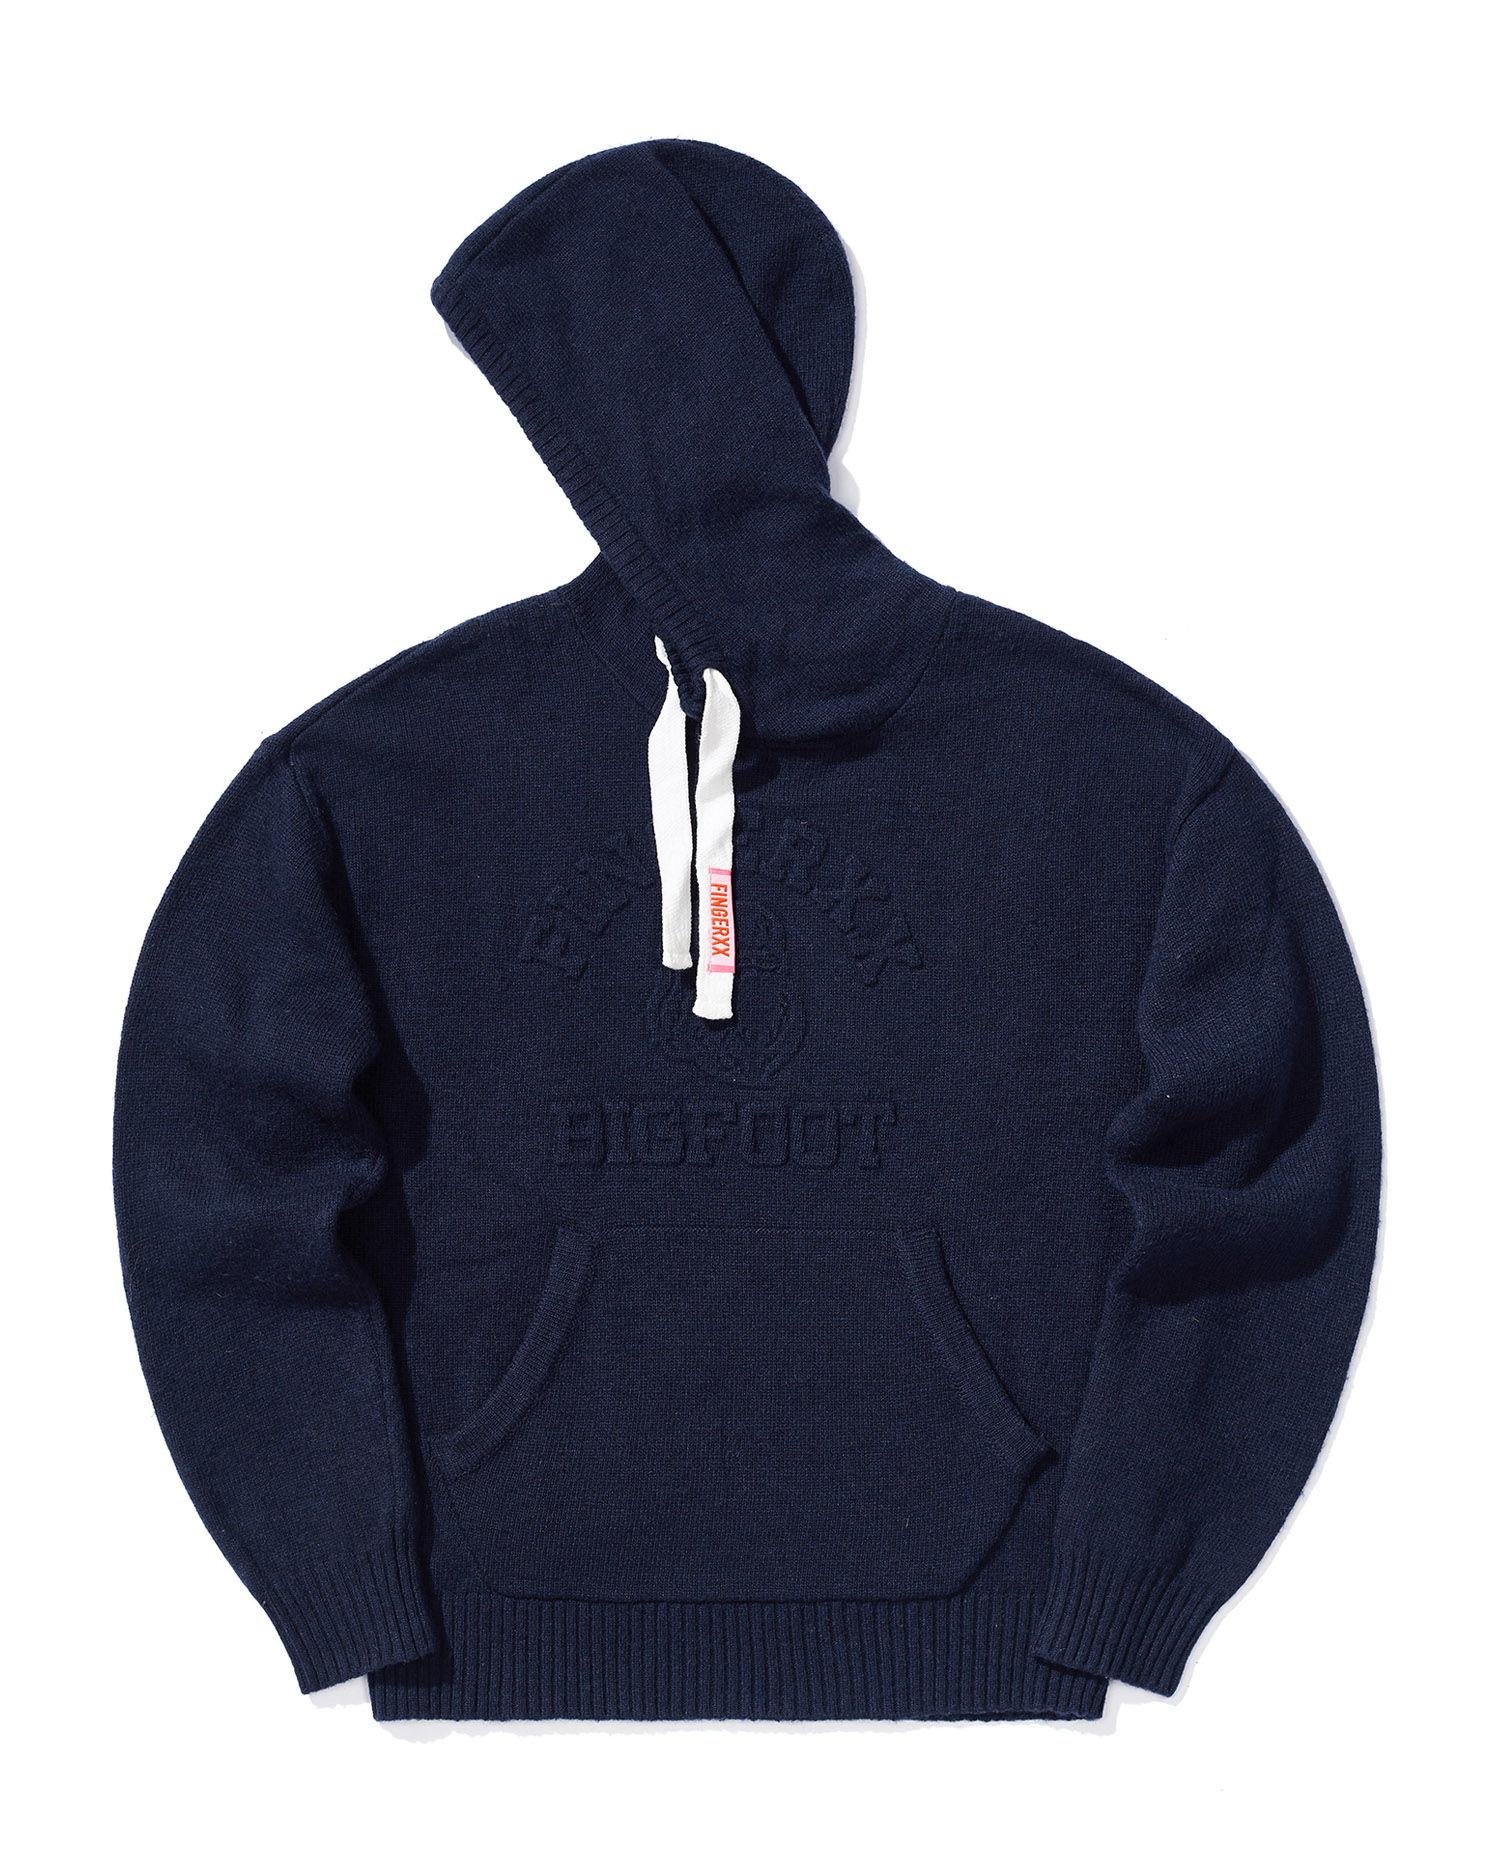 Big Foot embossed knitted hoodie by FINGERCROXX